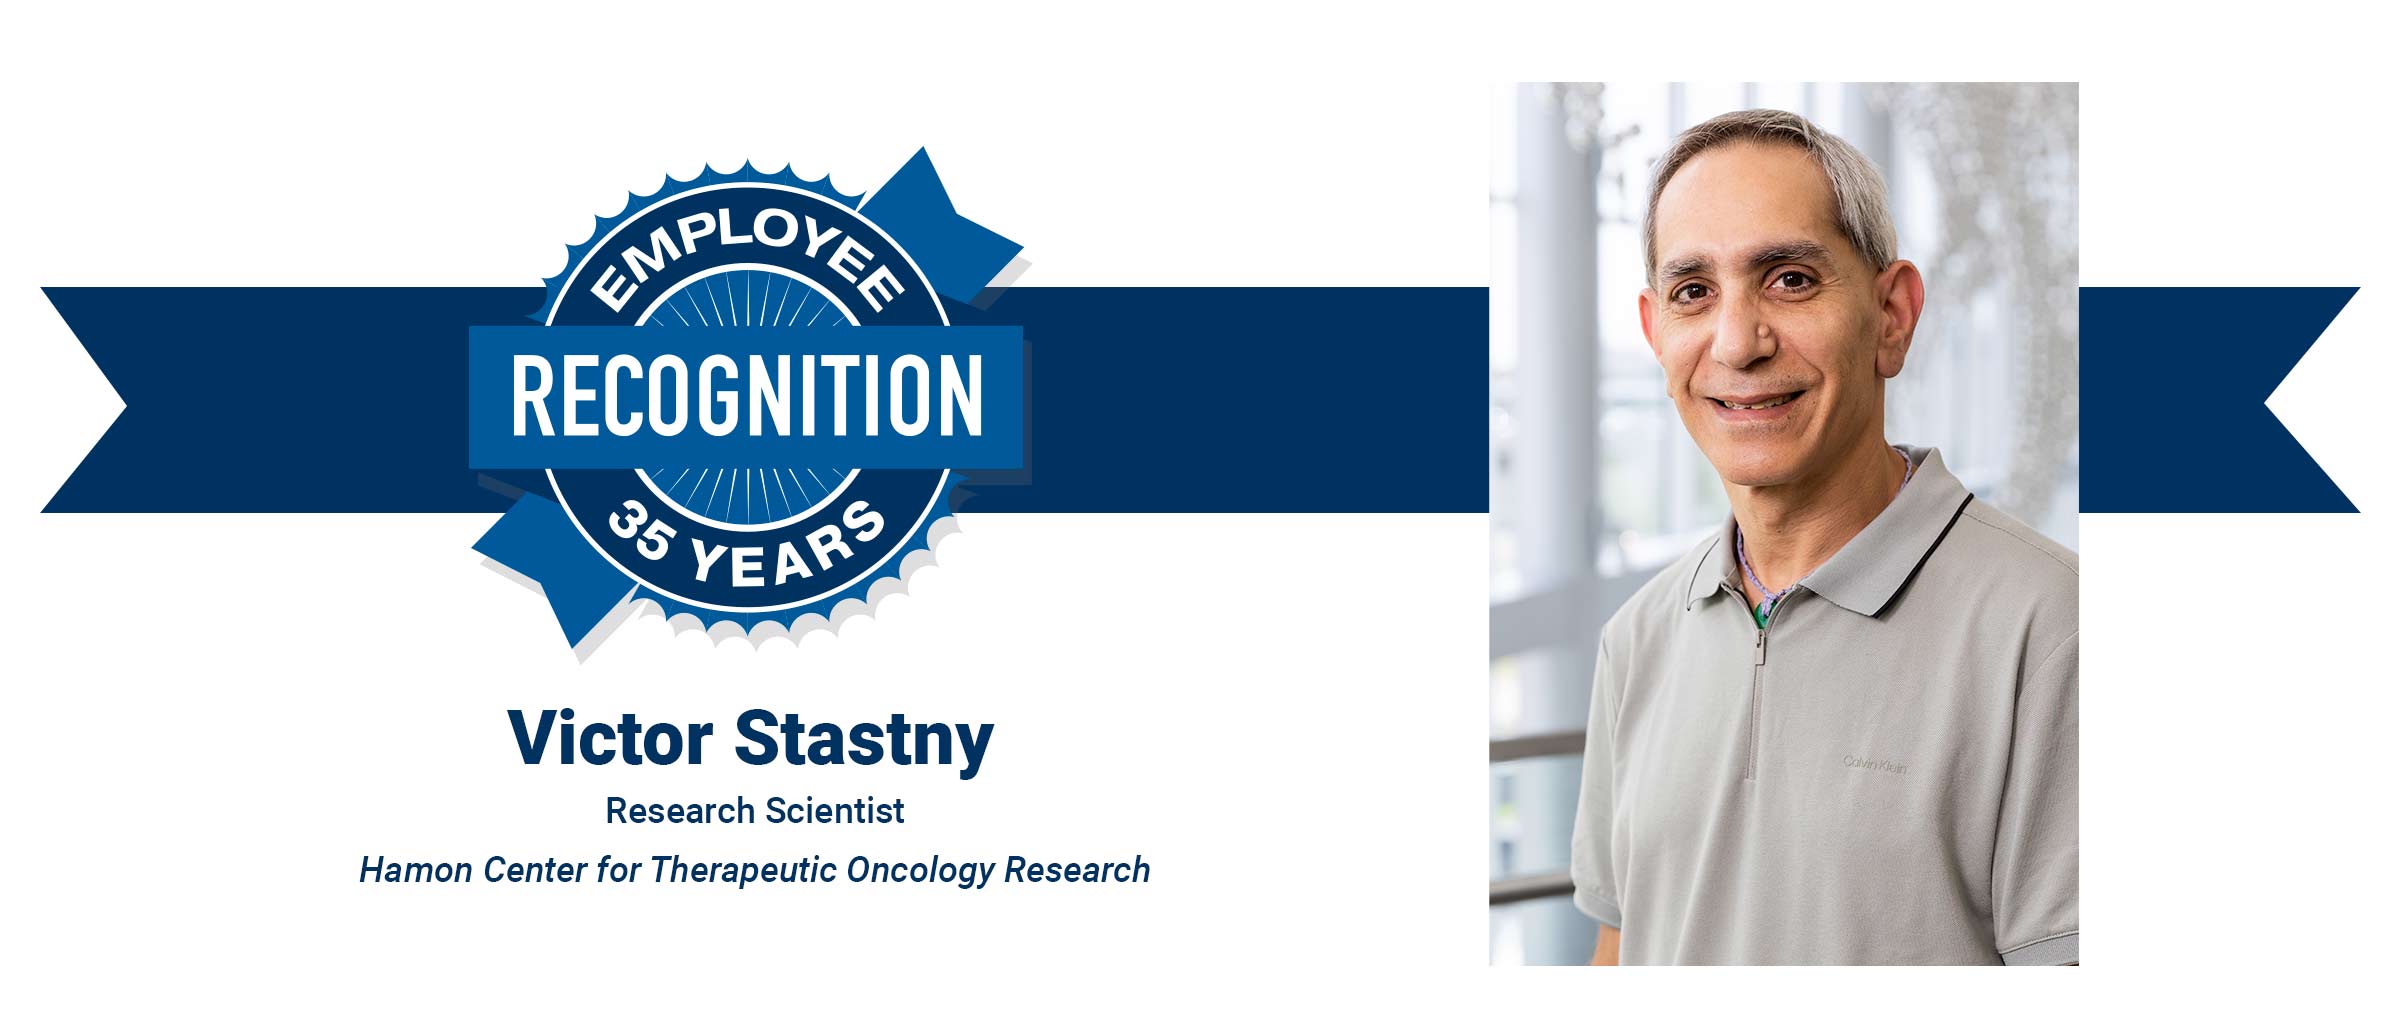 Man with short grey hair, wearing gray polo shirt, Victor Stastny 35 years employee recognition